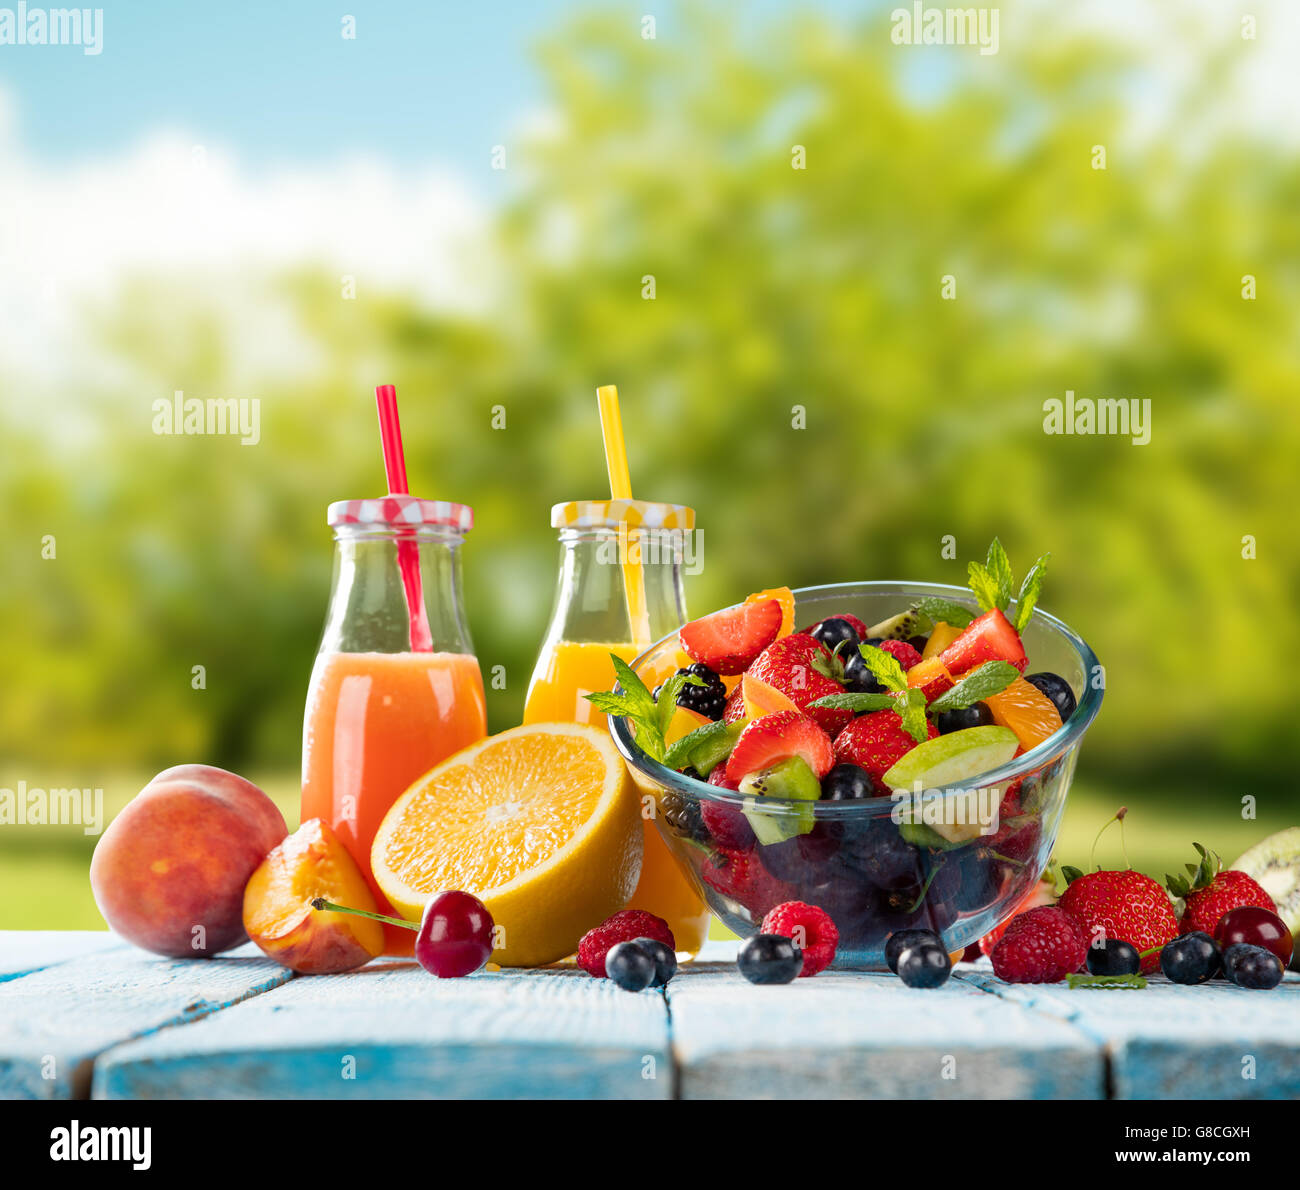 Fresh glasses of juice and salad with fruit mix placed on wooden planks. blur garden on background. Concept of healthy eating, a Stock Photo